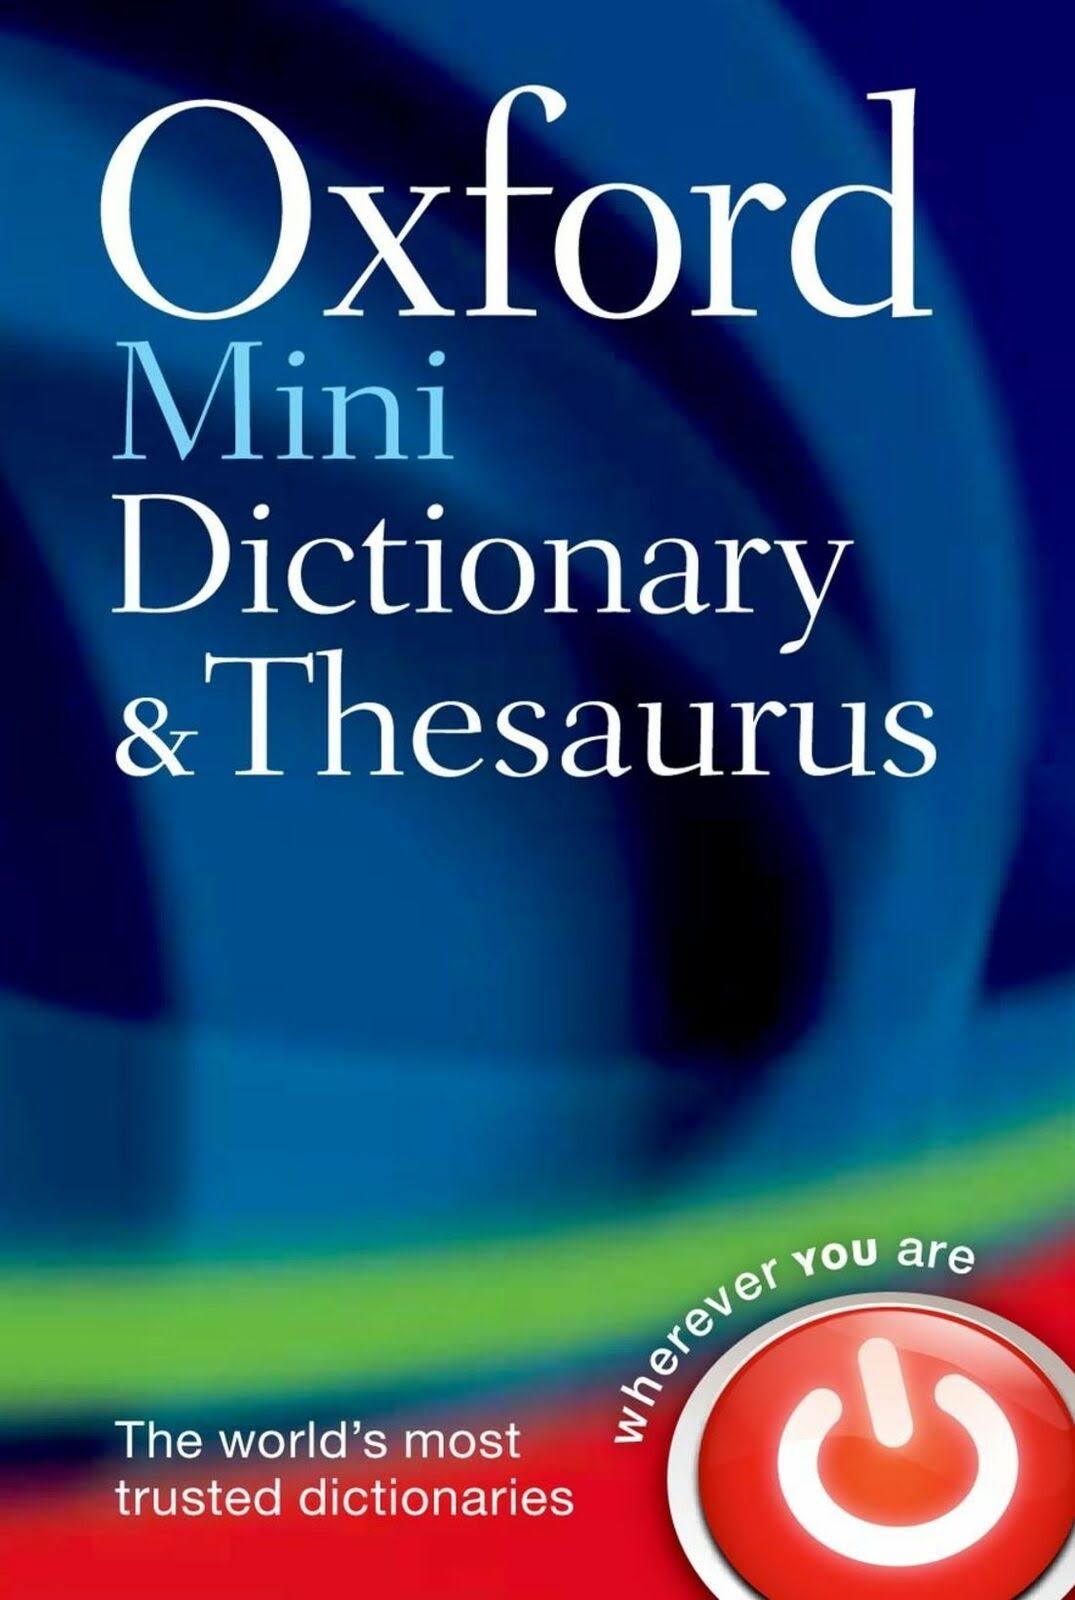 Oxford Mini Dictionary and Thesaurus [Book]